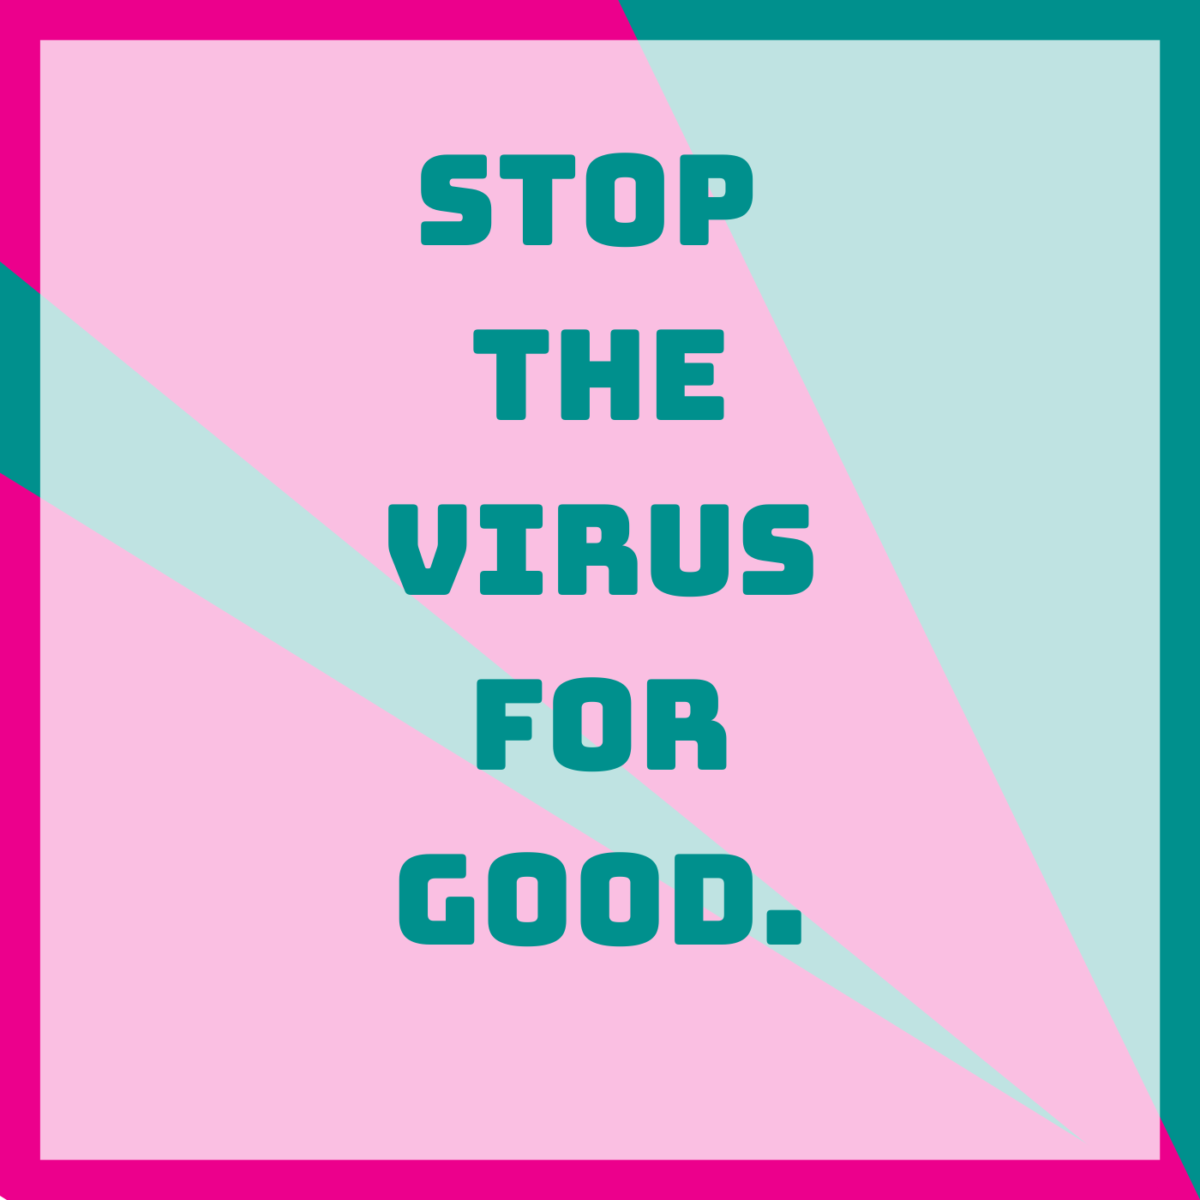 Stop the virus for good